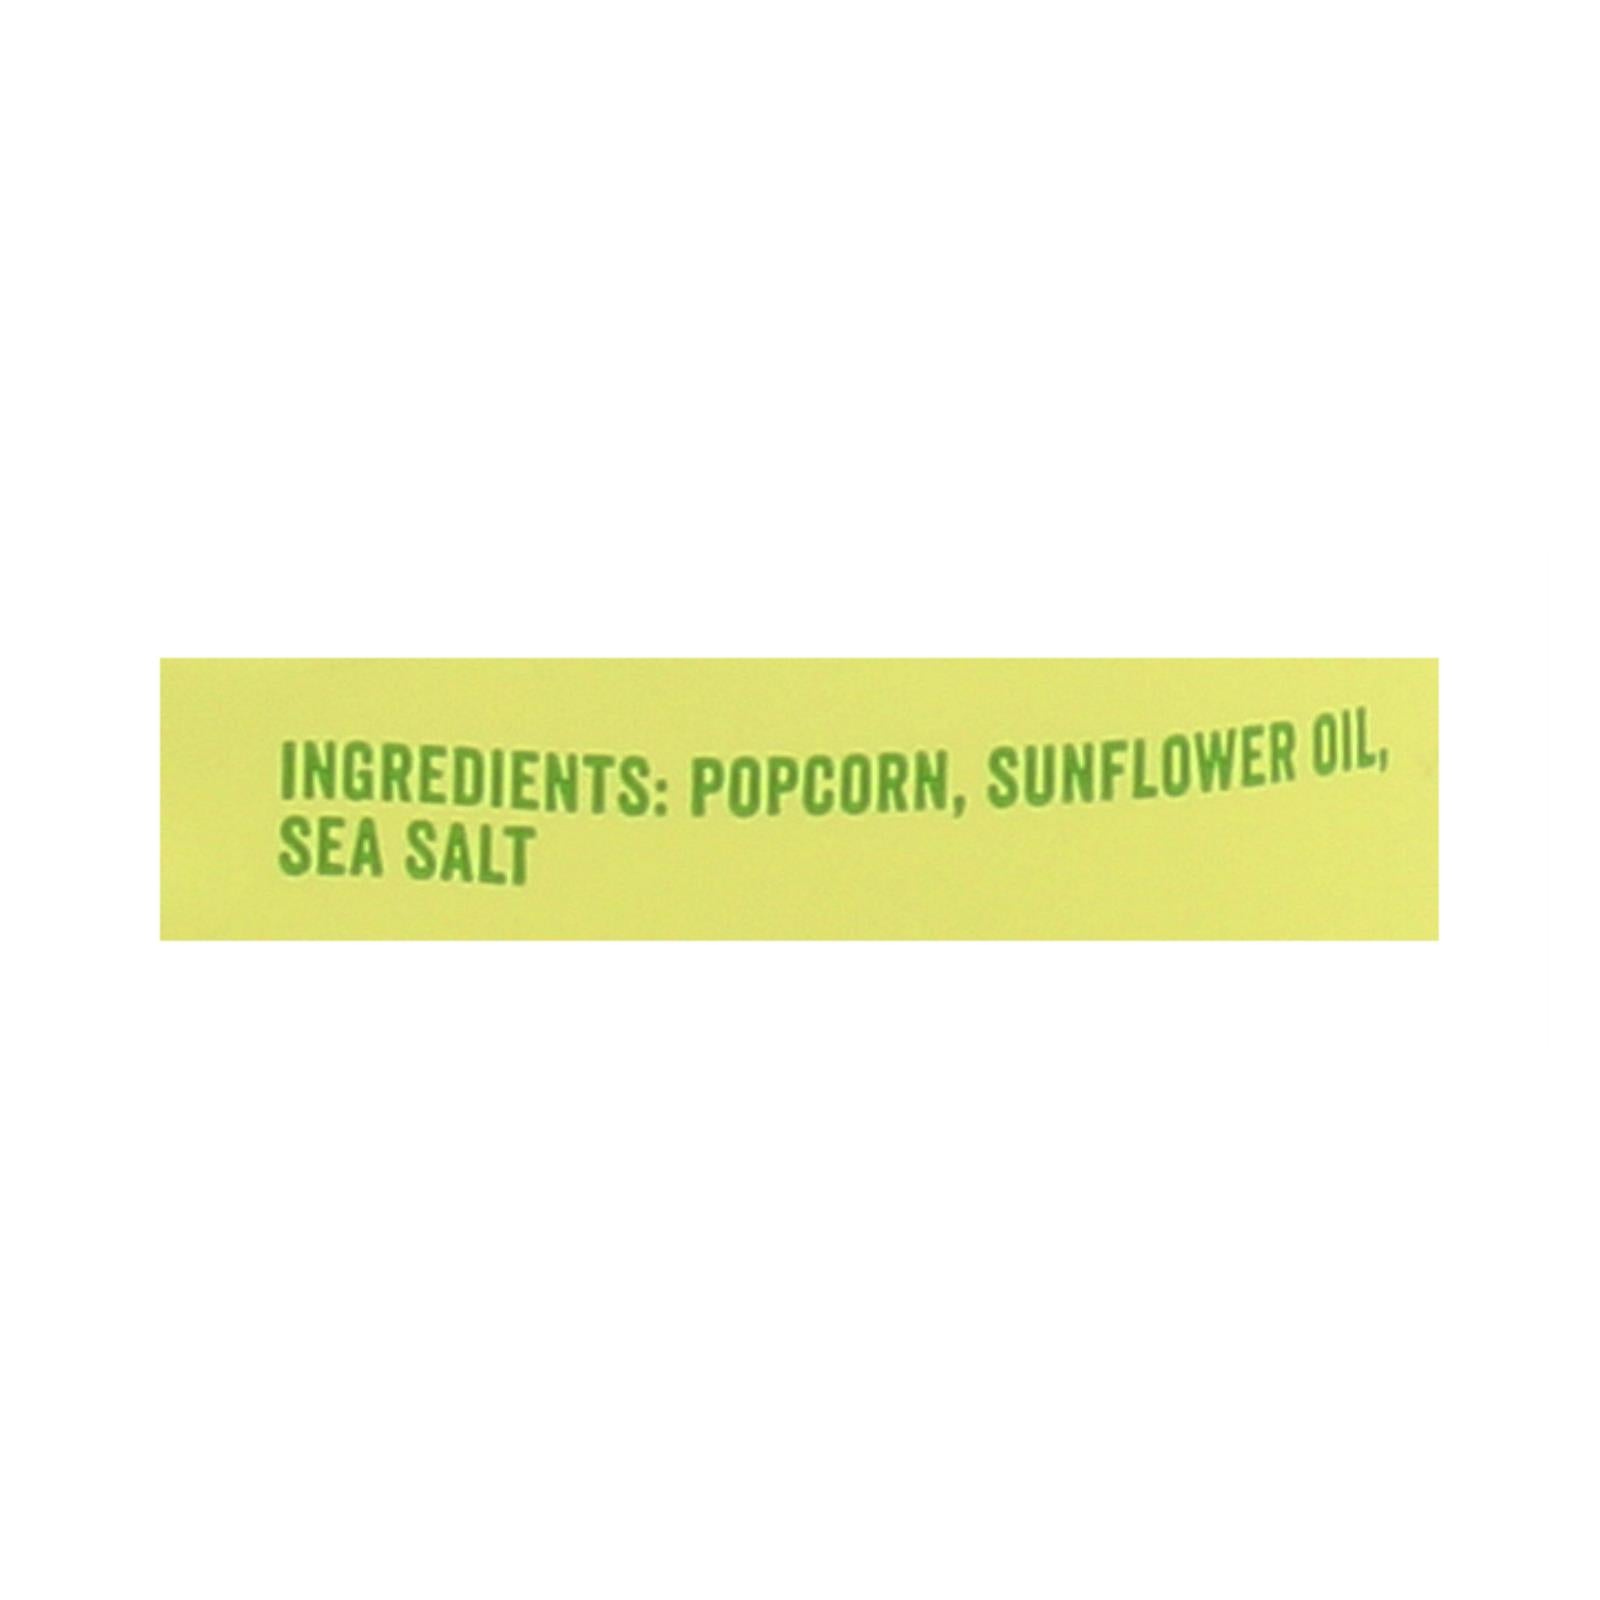 Buy Angie's Kettle Corn Boom Chicka Pop Sea Salt Popcorn - Case Of 12 - 1.25 Oz.  at OnlyNaturals.us